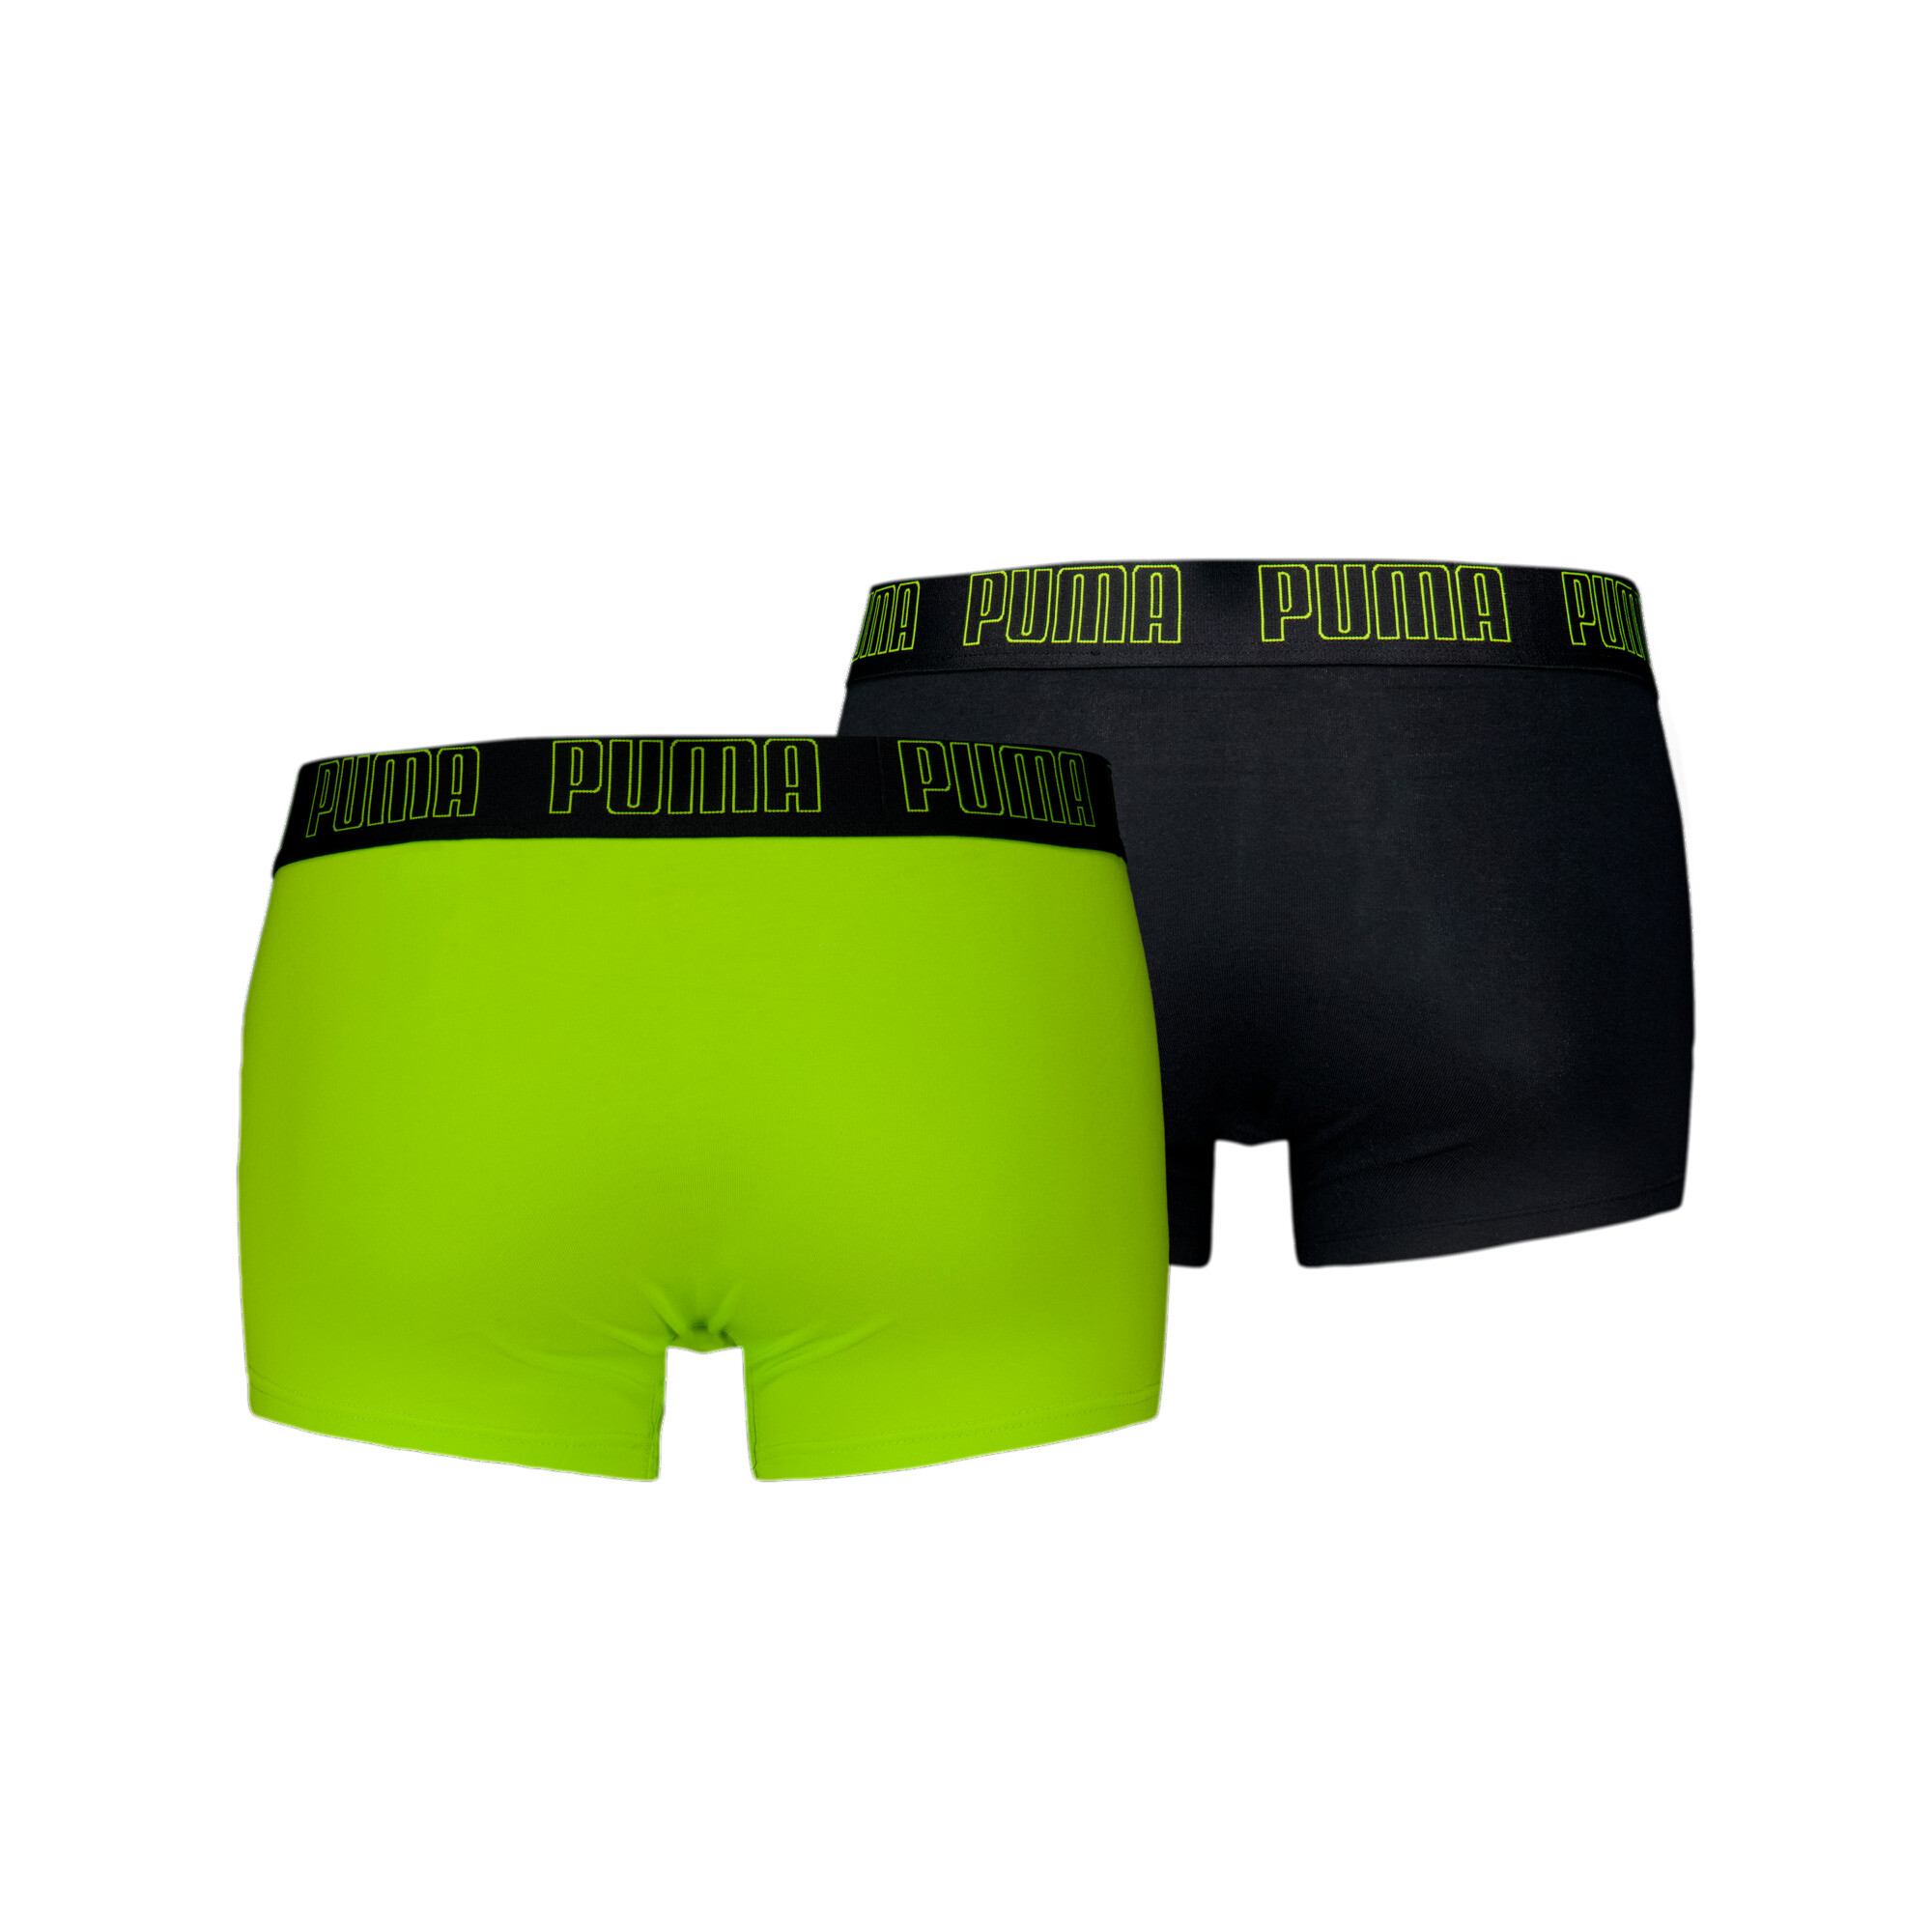 Men's Puma's Trunks 2 Pack, Yellow, Size 5, Clothing